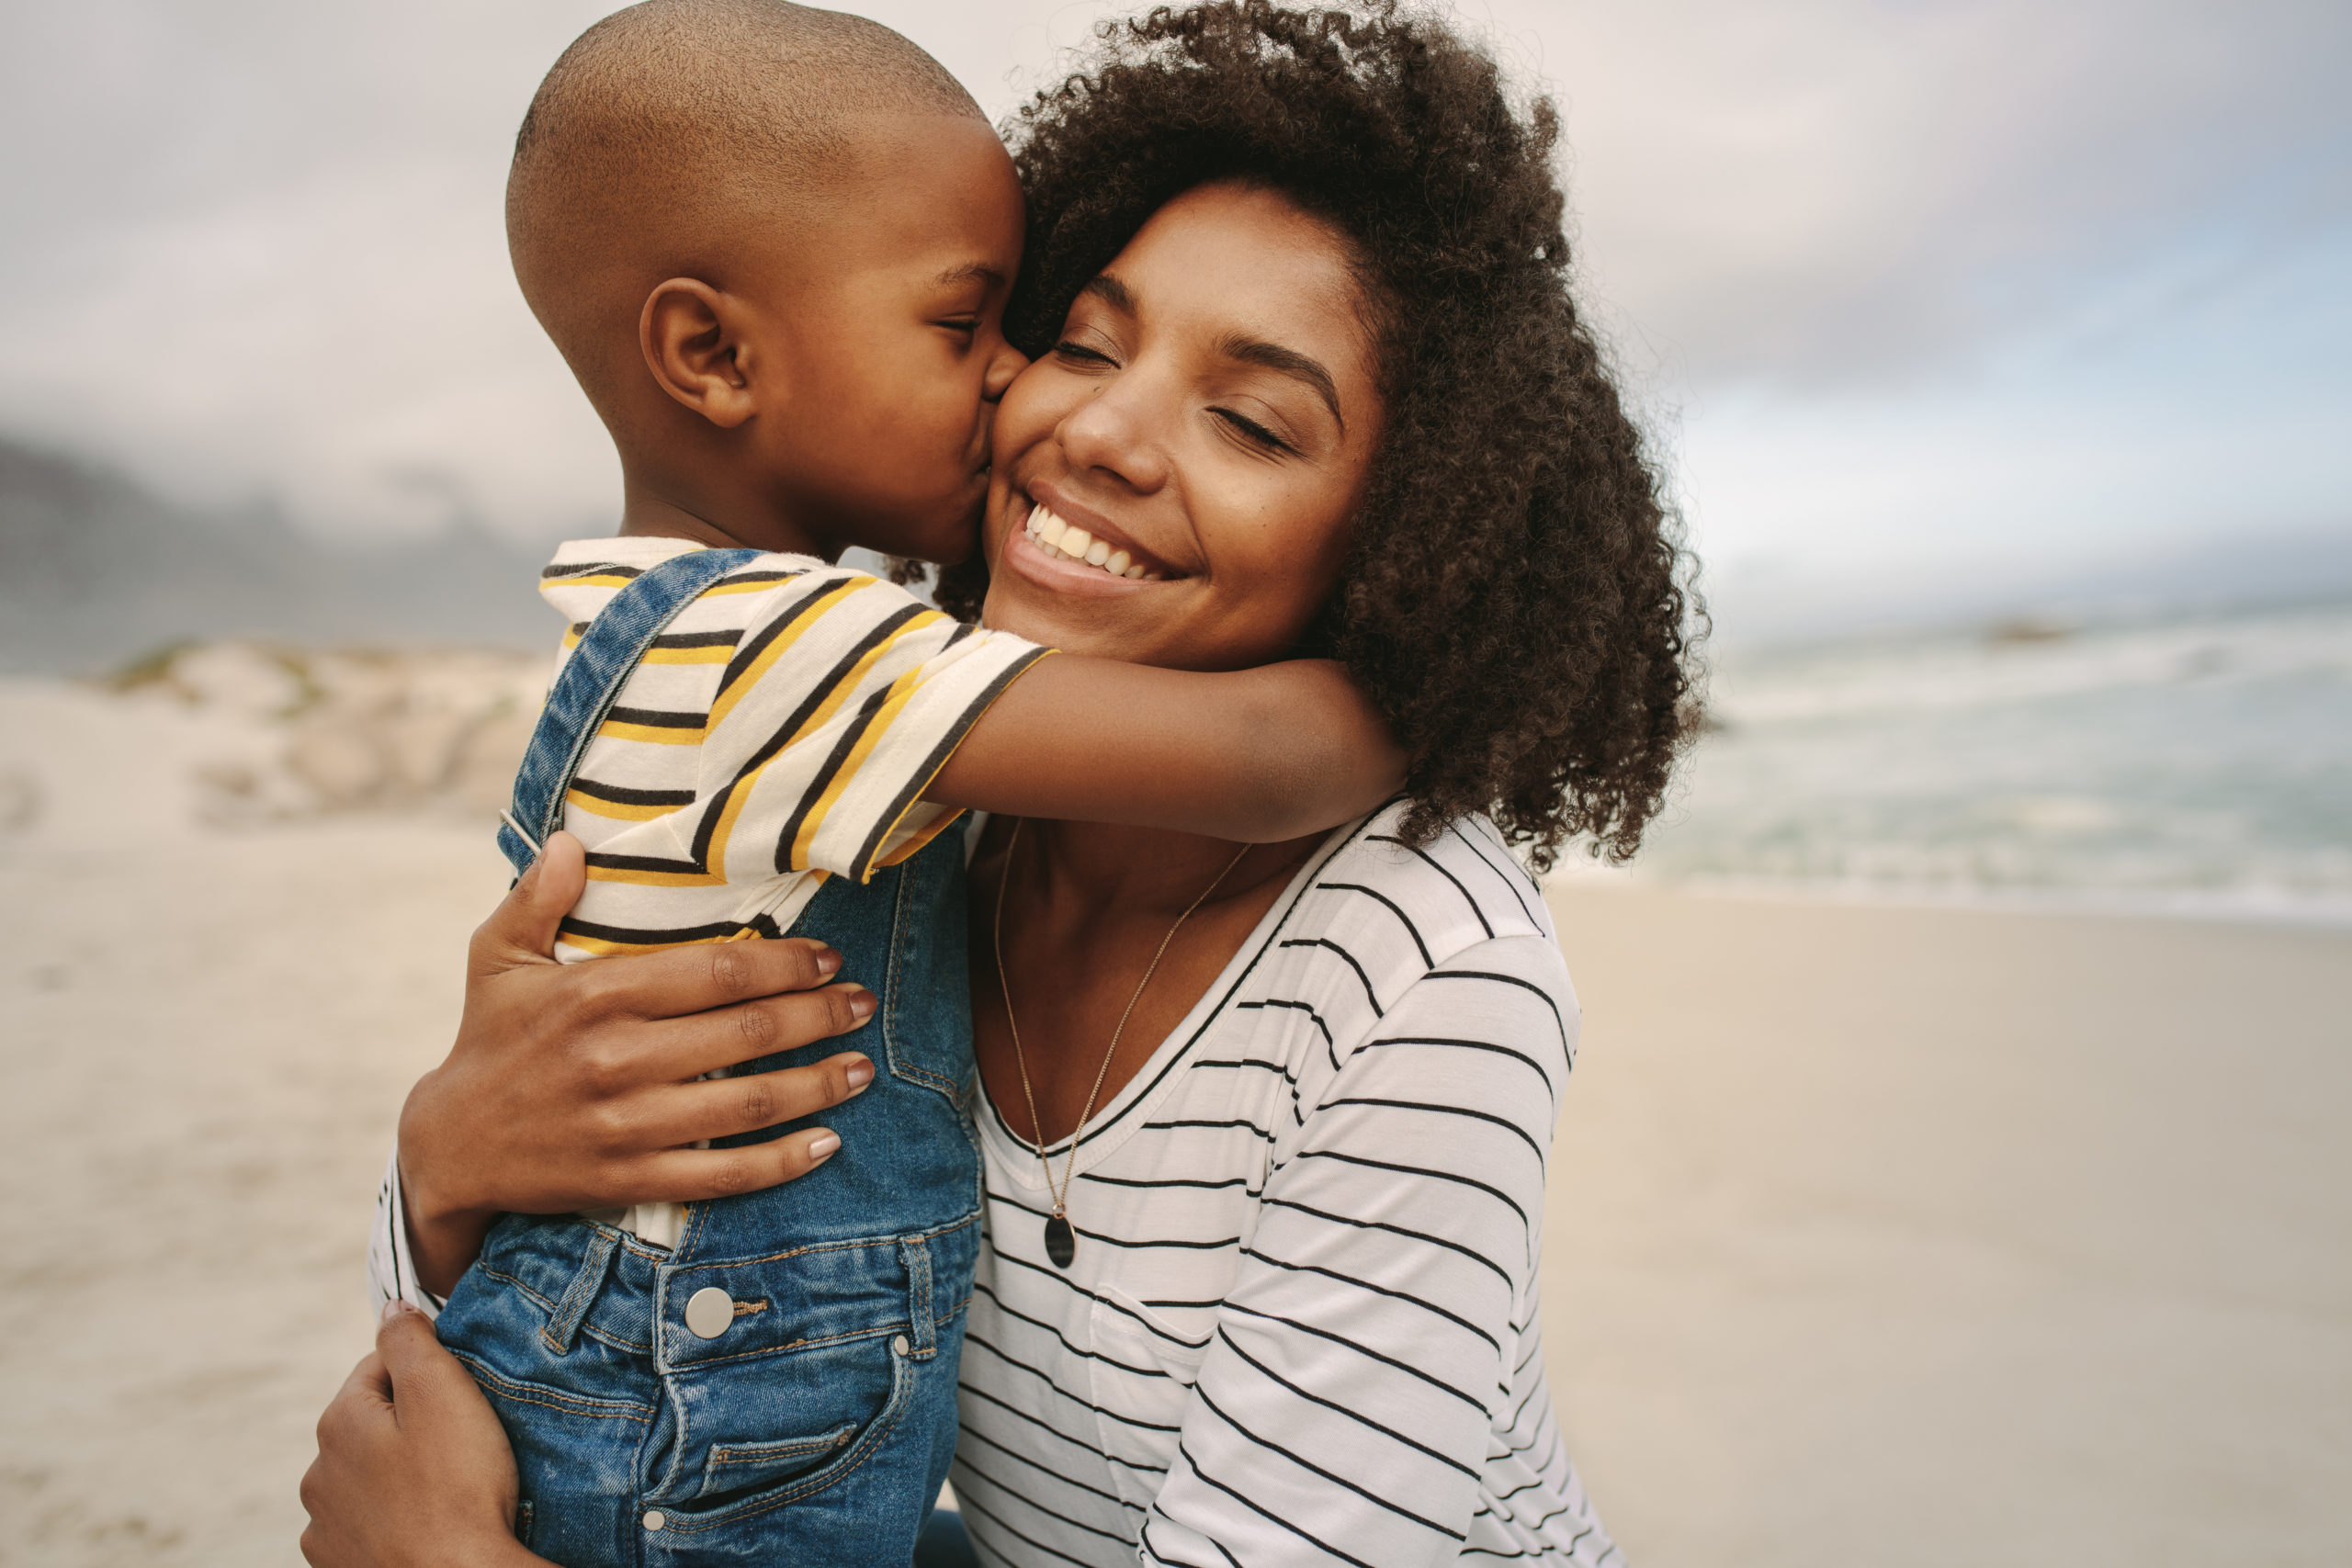 What Does a Mother Want For Her Children? - iMOM